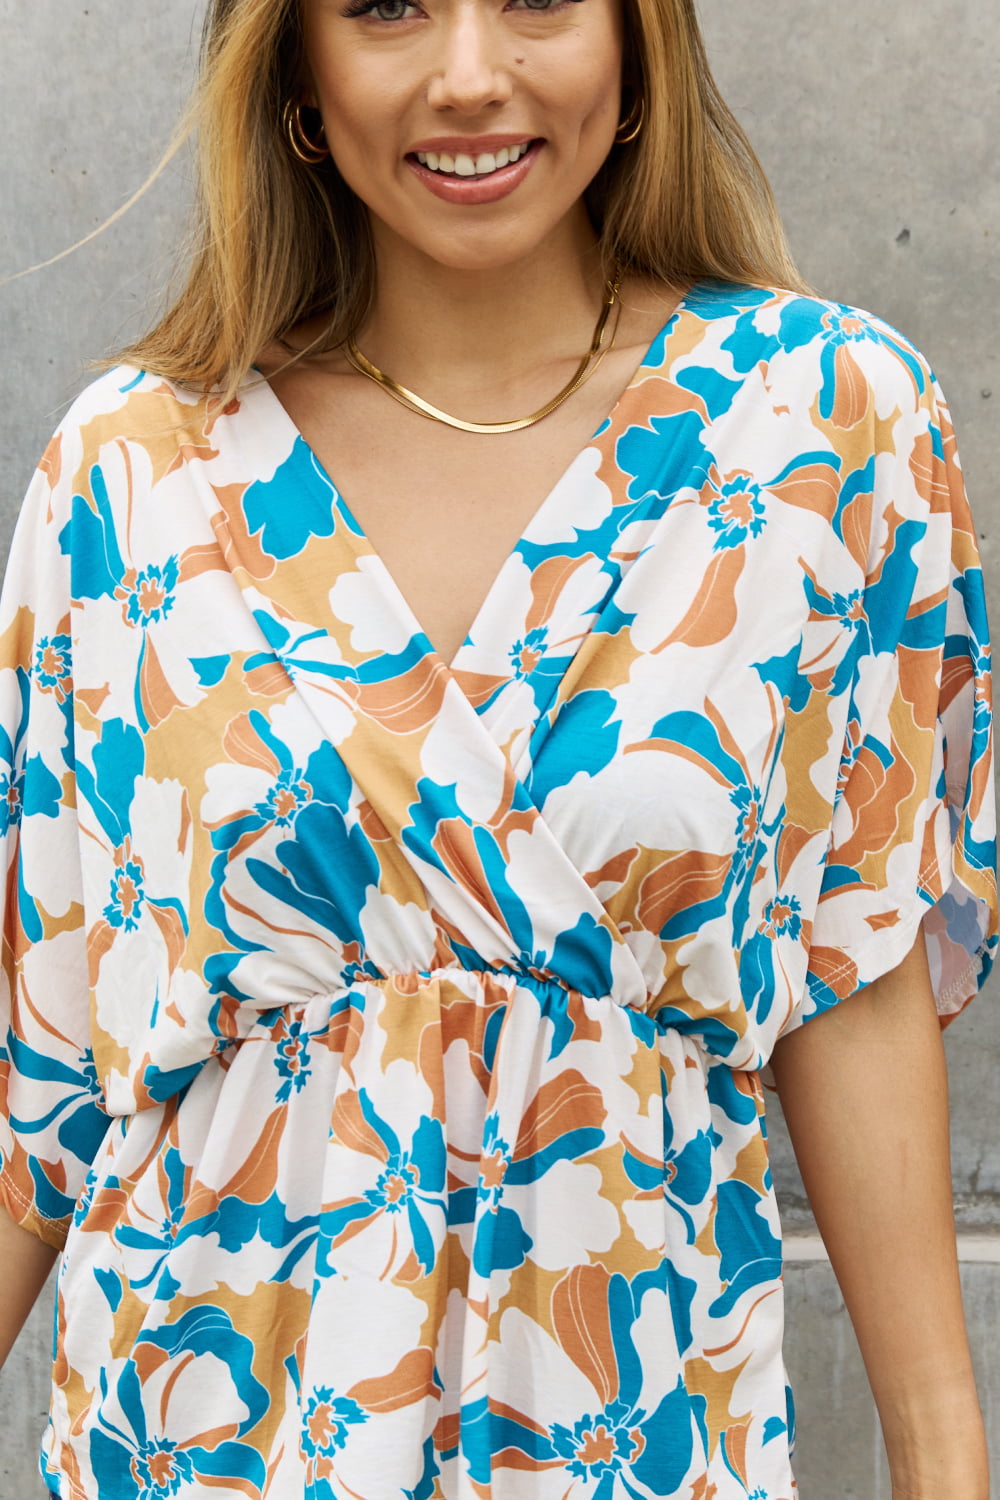 BOMBOM Floral Print Wrap Tunic Top - Online Only